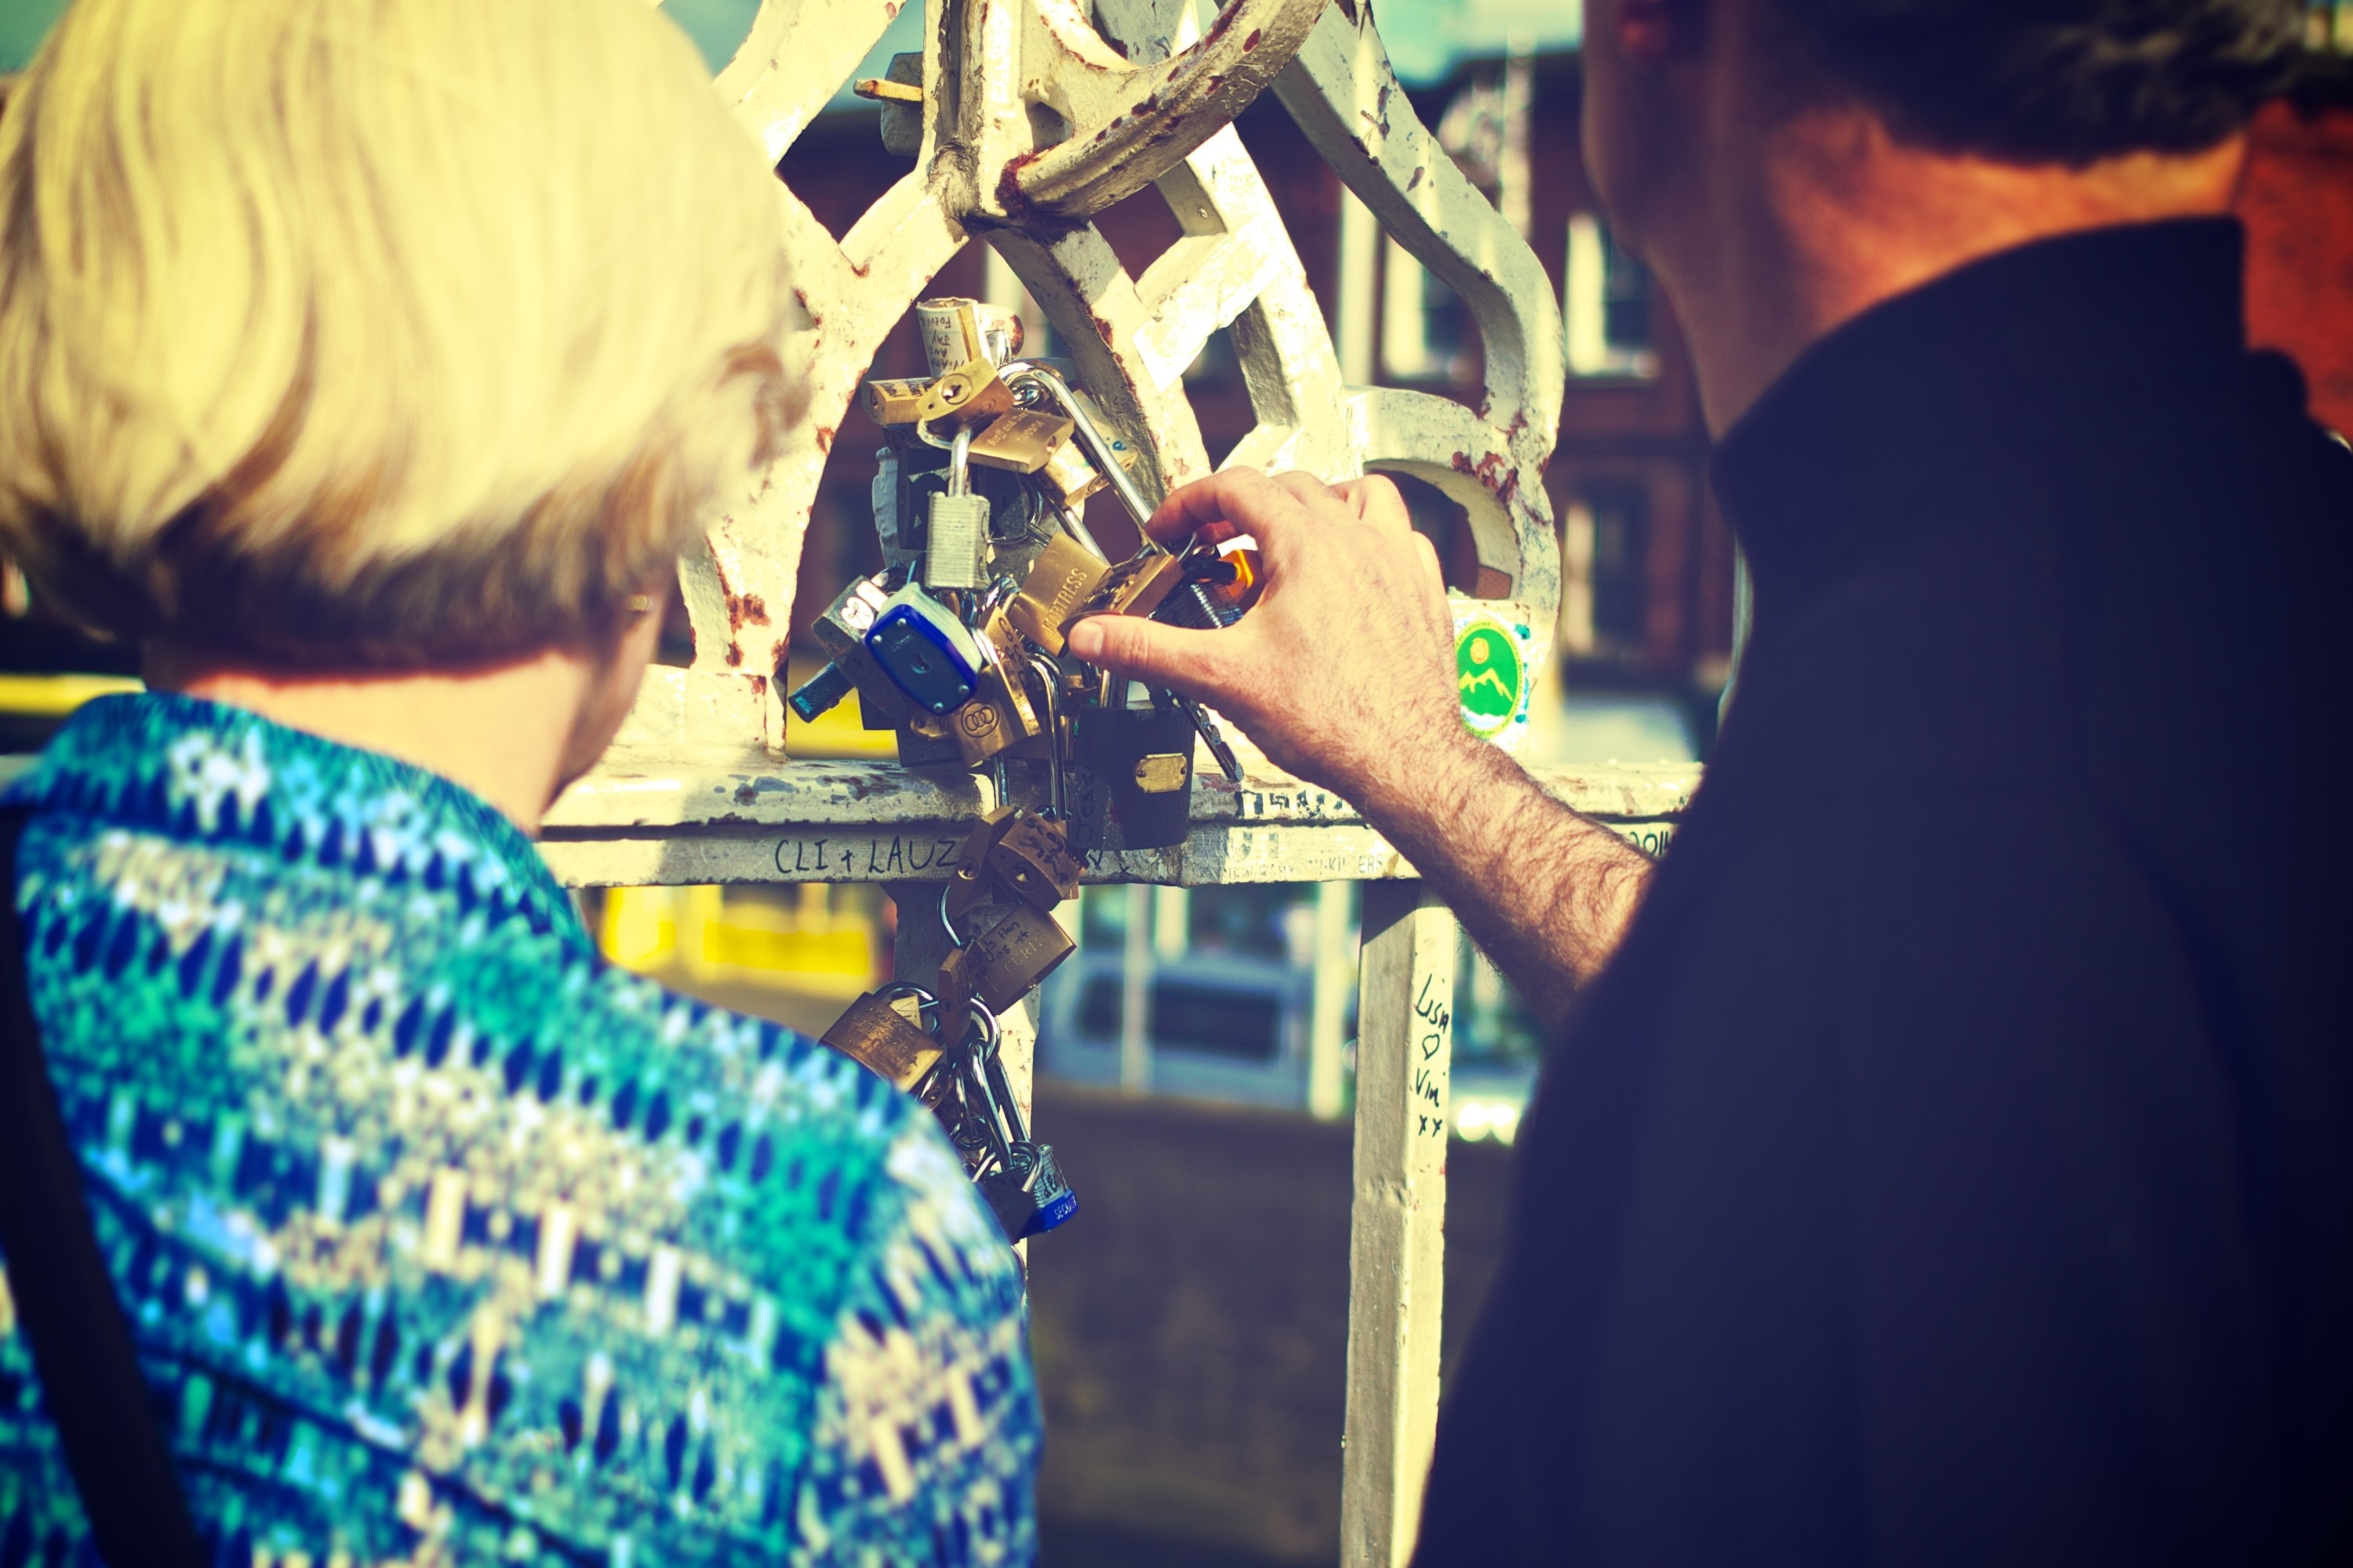 man and woman holding a padlock during daytime